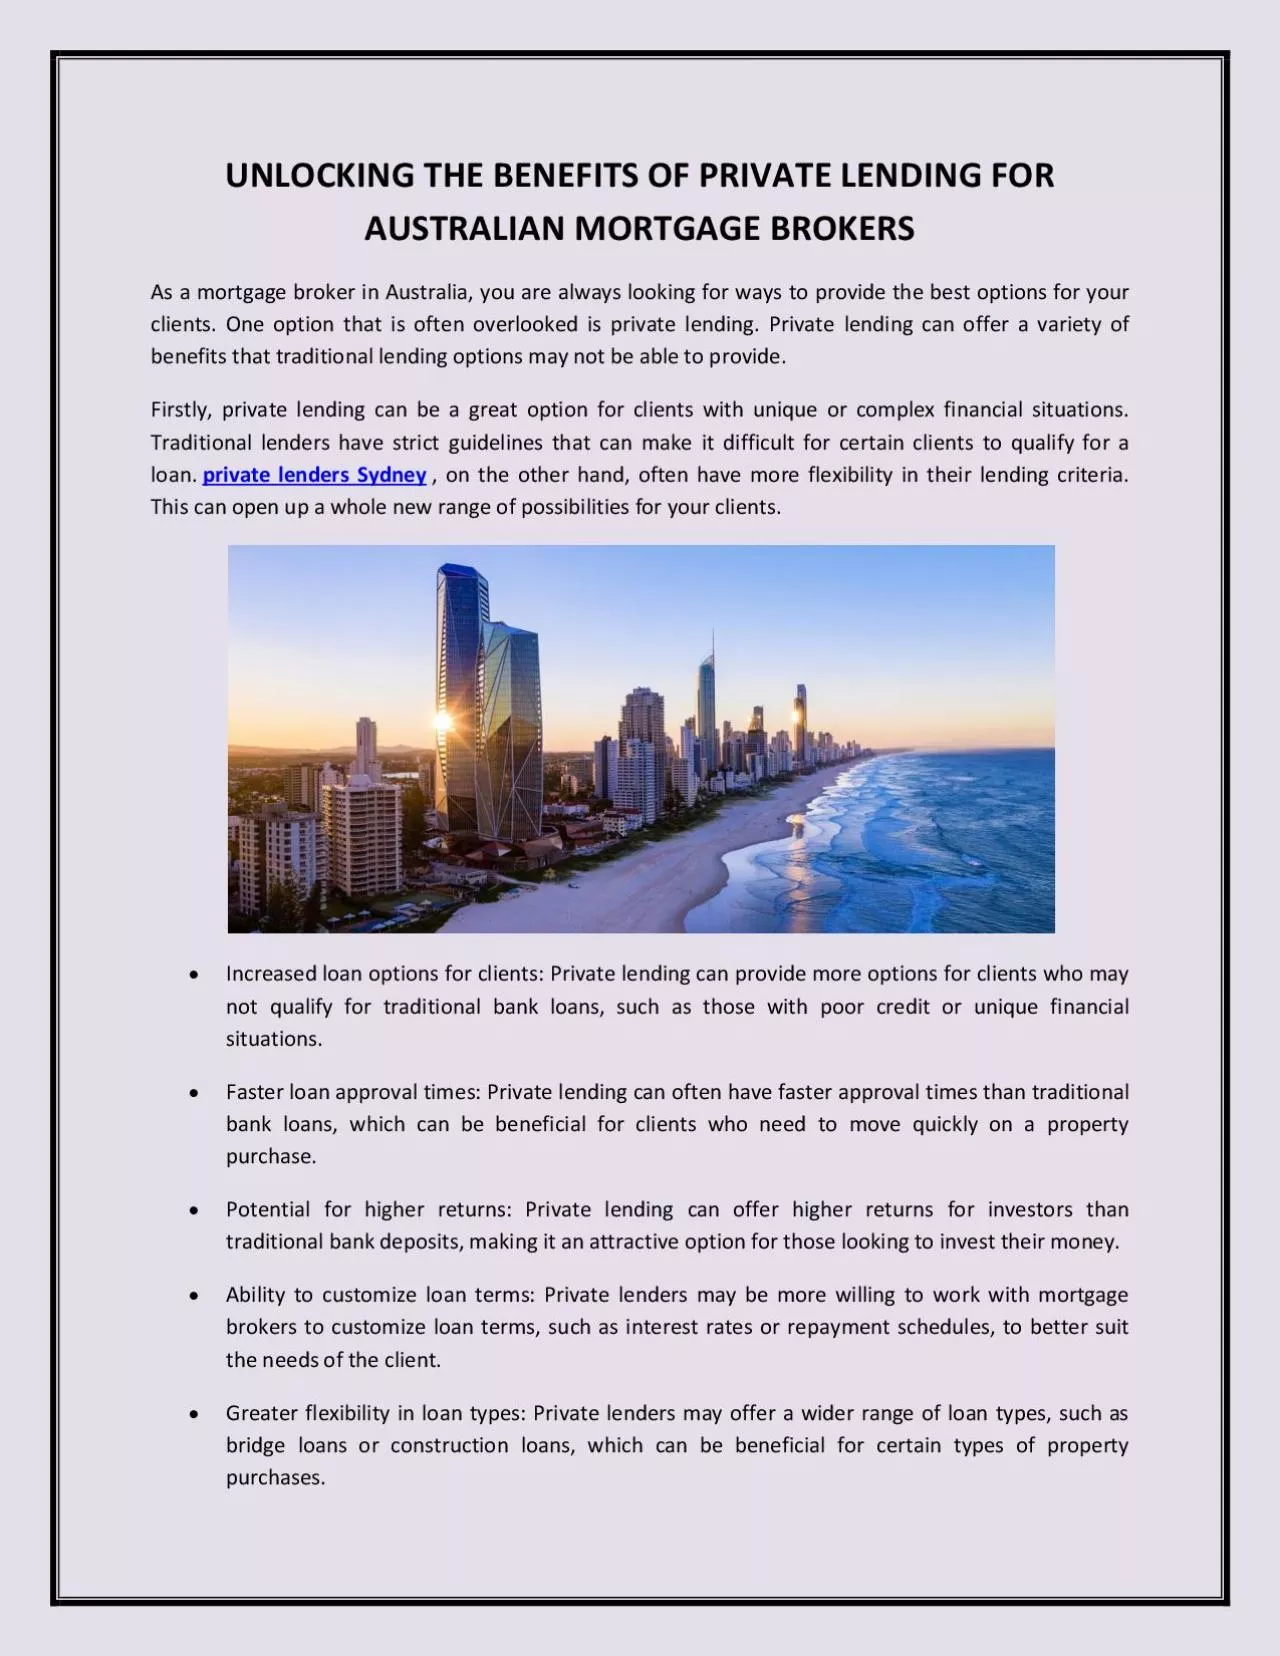 UNLOCKING THE BENEFITS OF PRIVATE LENDING FOR AUSTRALIAN MORTGAGE BROKERS